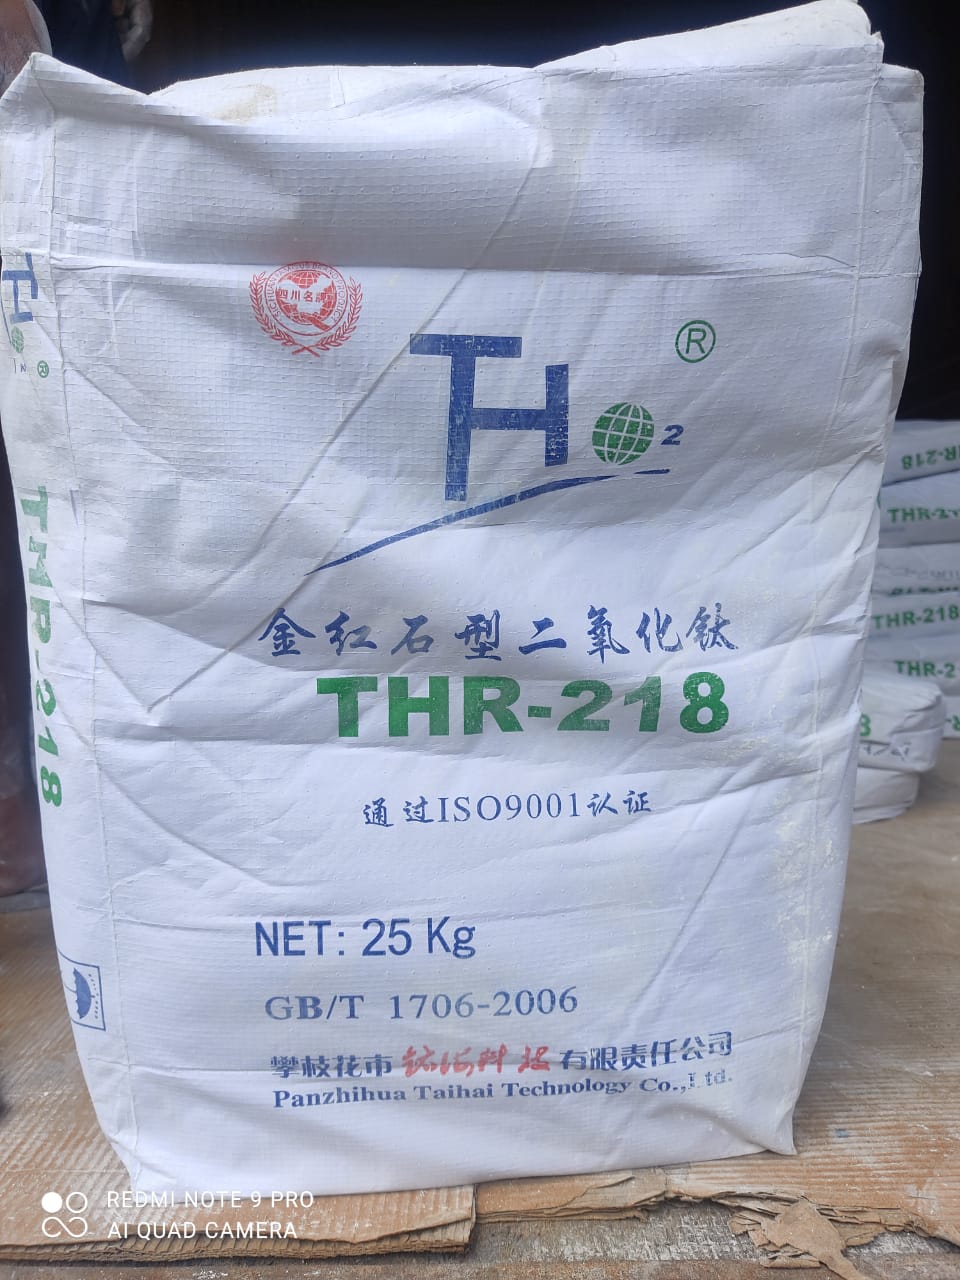 https://static.cnmqh.com/Thr-218 For Painting Coating Ink Rutile Titanium Dioxide Thr-218 High Dispersion Industry Grade